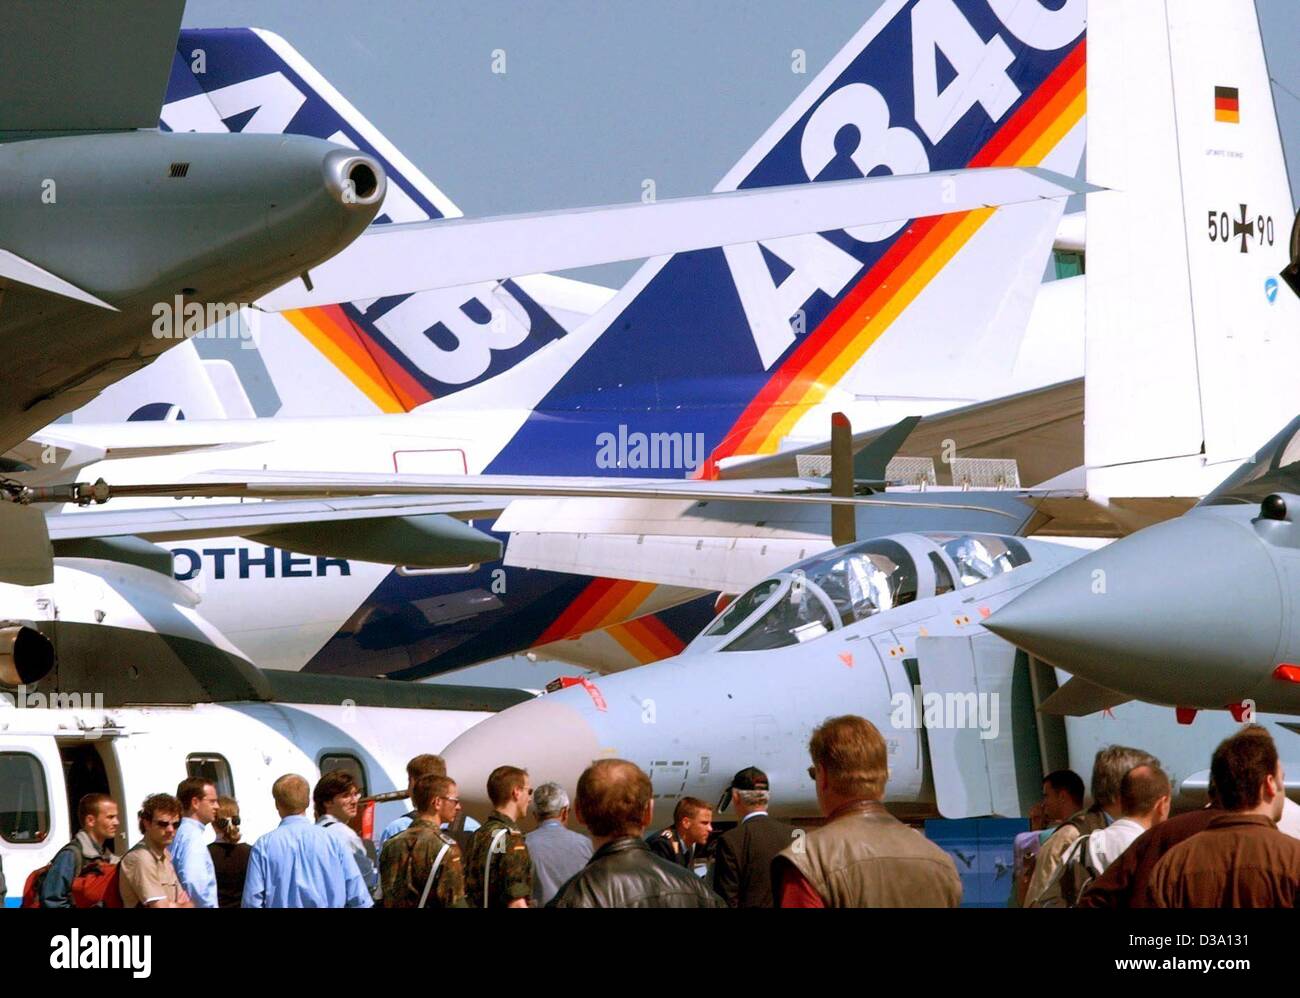 (dpa) - Visitors of the 6th International Aviation Fair ILA ('Internationalen Luft- und Raumfahrt-Ausstellung') are looking at several war planes and passenger planes of the Airbus group exhibited in Berlin-Schoenefeld, 8 May 2002. 1067 exhibitors from 40 countries were taking part. Stock Photo